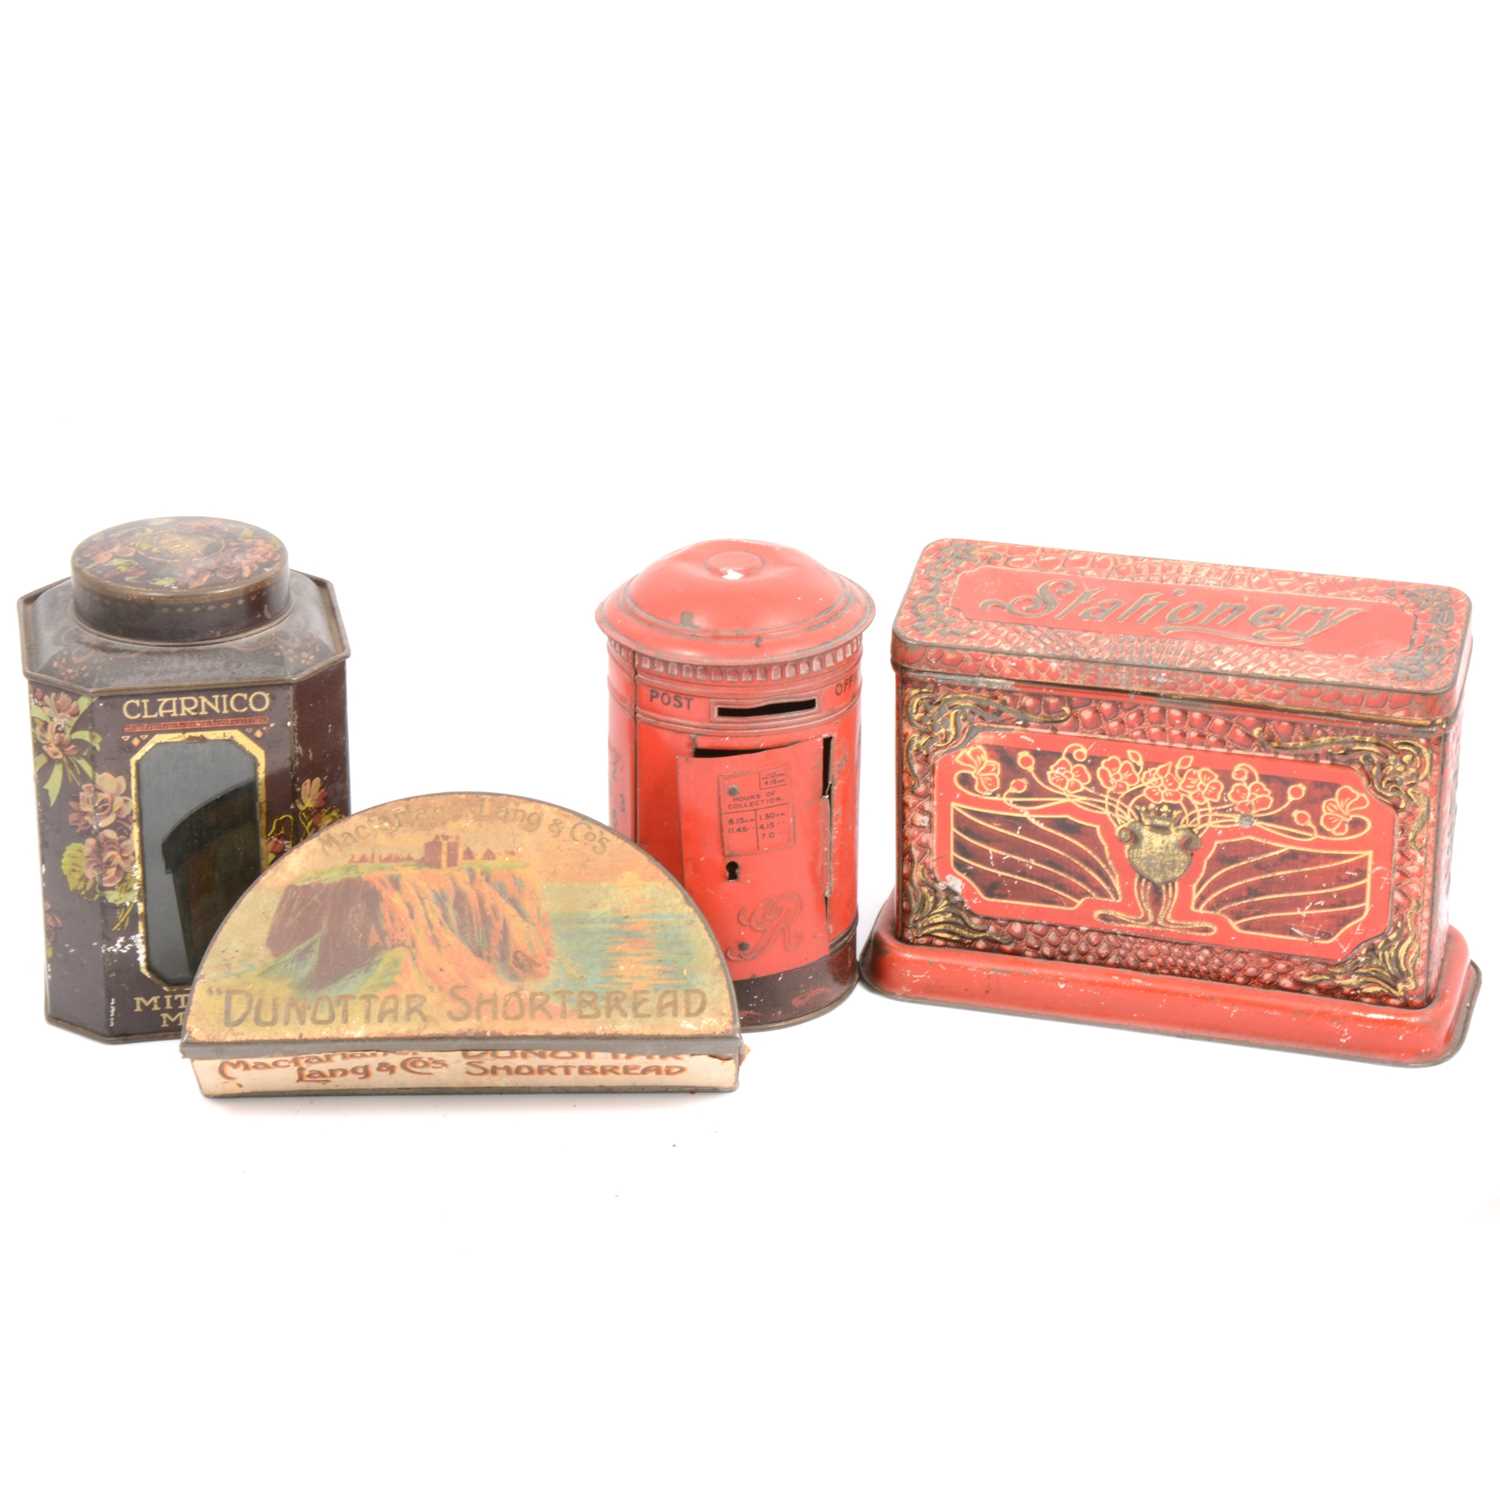 Lot 124 - Early 20th-century confectionery tins